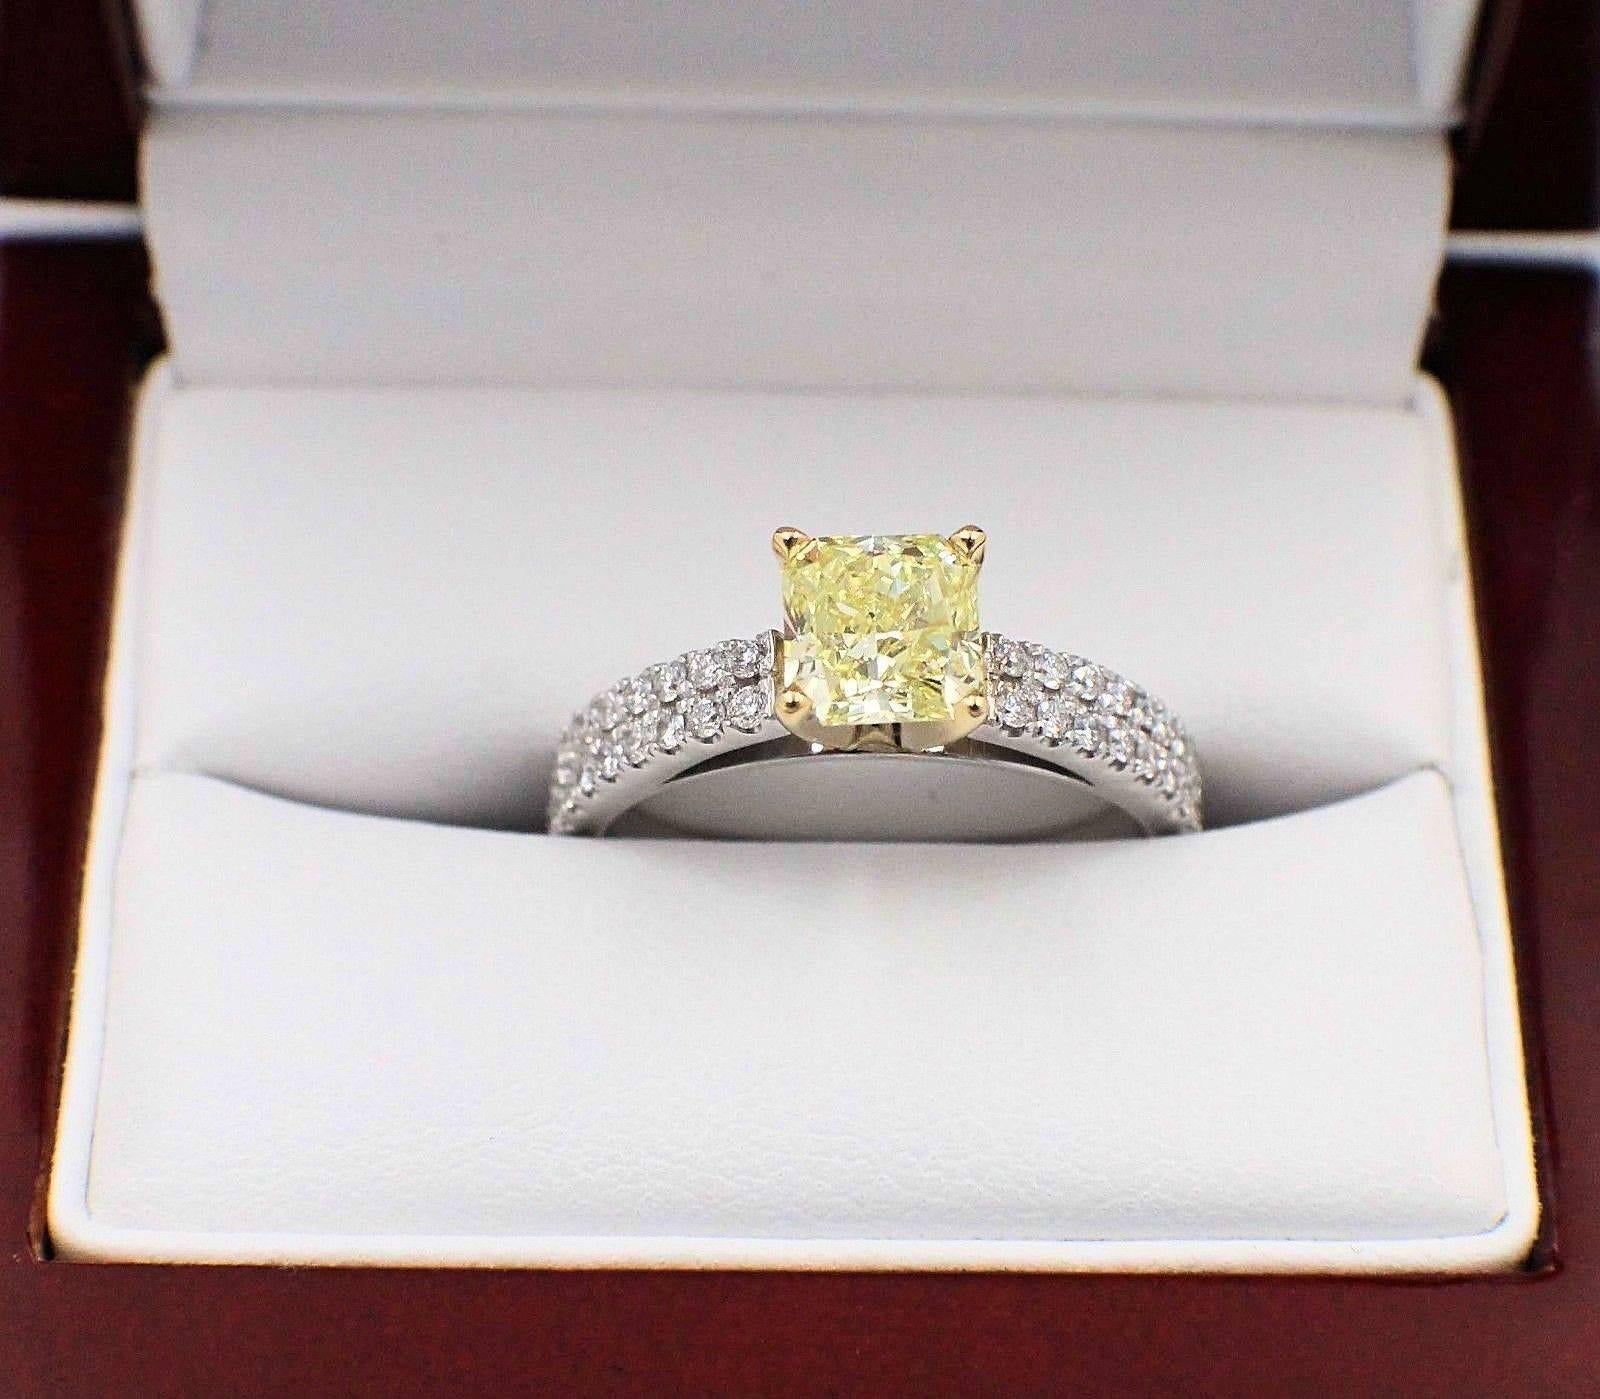 Women's Fancy Yellow Radiant 1.62 TCW Diamond Engagement Ring with Pave Diamond Accents